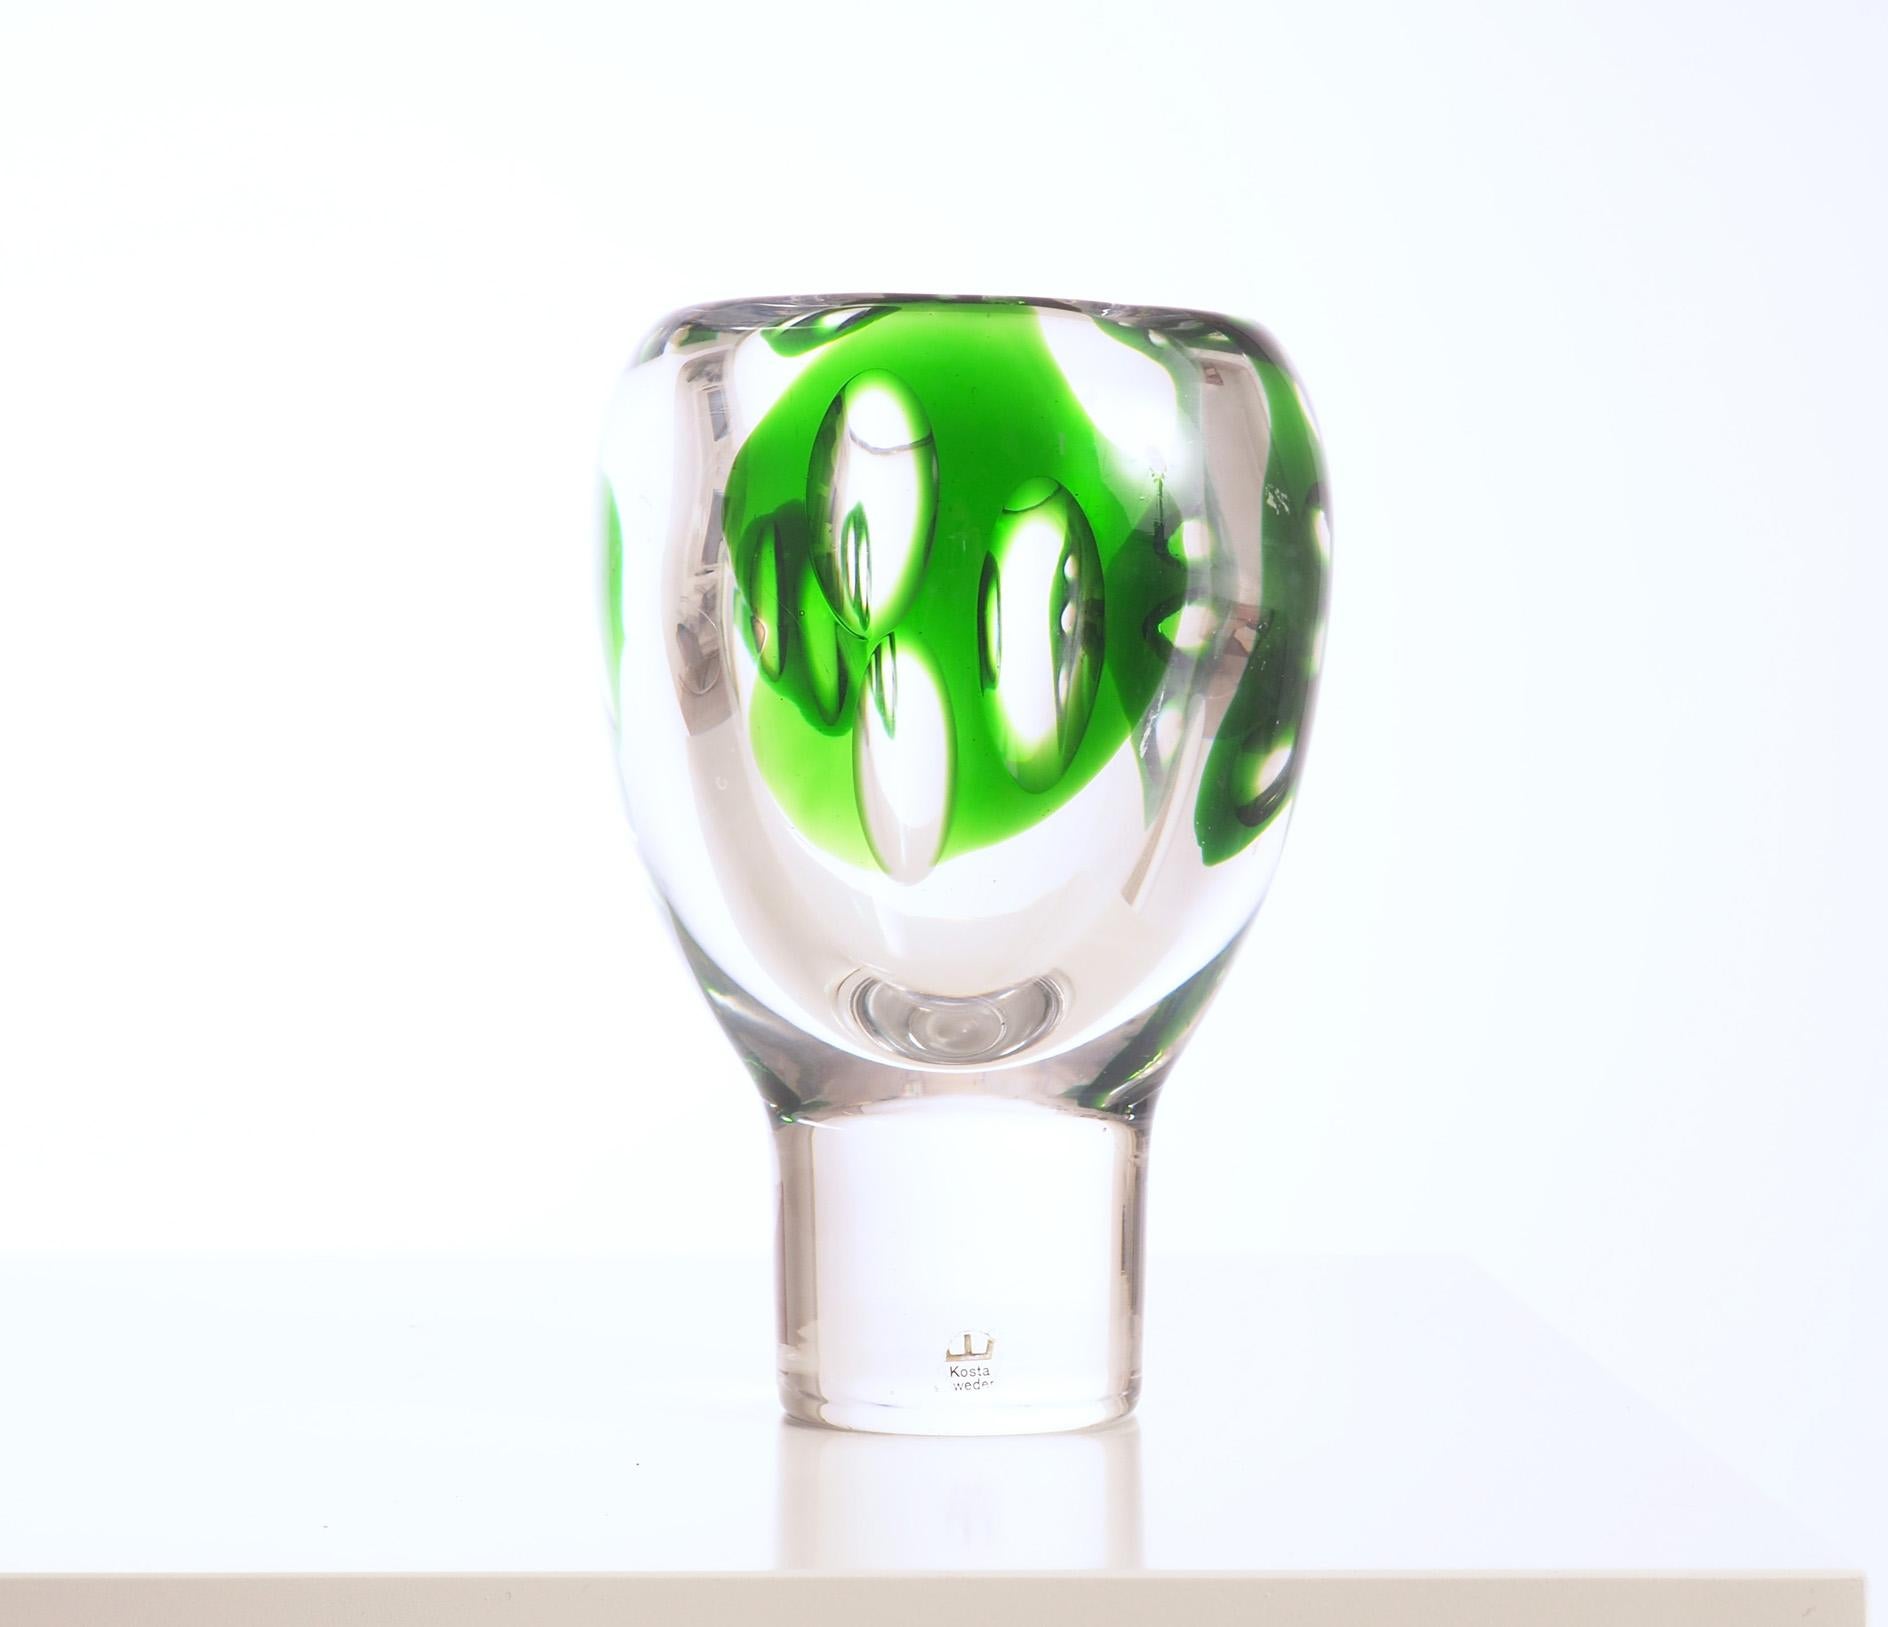 Vase by the Swedish glass artist Vicke Lindstrand. This piece was produced at Kosta during the 1950s and signed 46690 Lindstrand. The vase is in heavy glass, hand blown with inclosed green pattern and grinded for more optical effects.